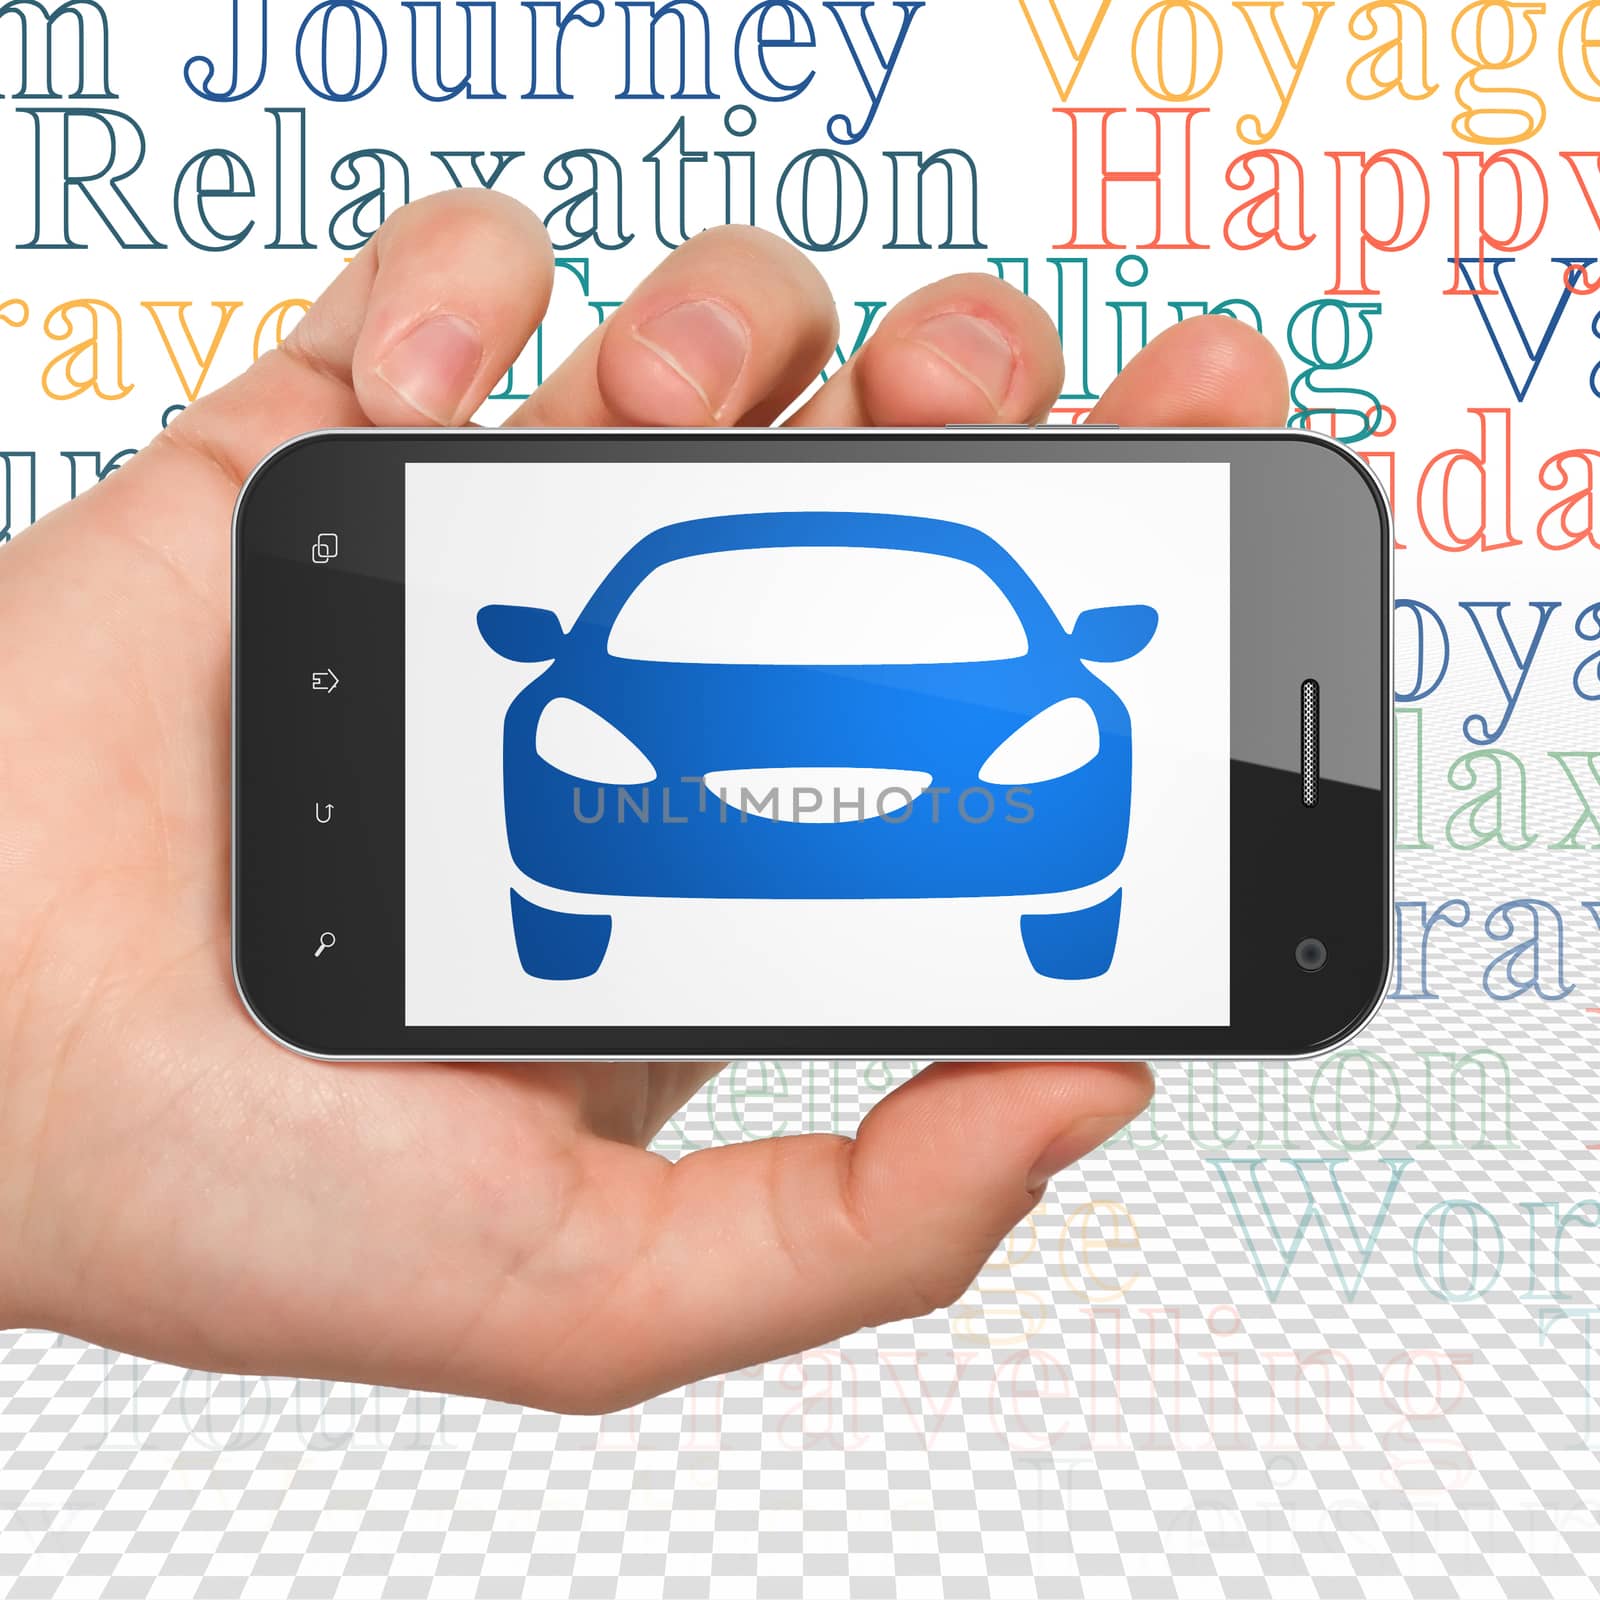 Tourism concept: Hand Holding Smartphone with  blue Car icon on display,  Tag Cloud background, 3D rendering